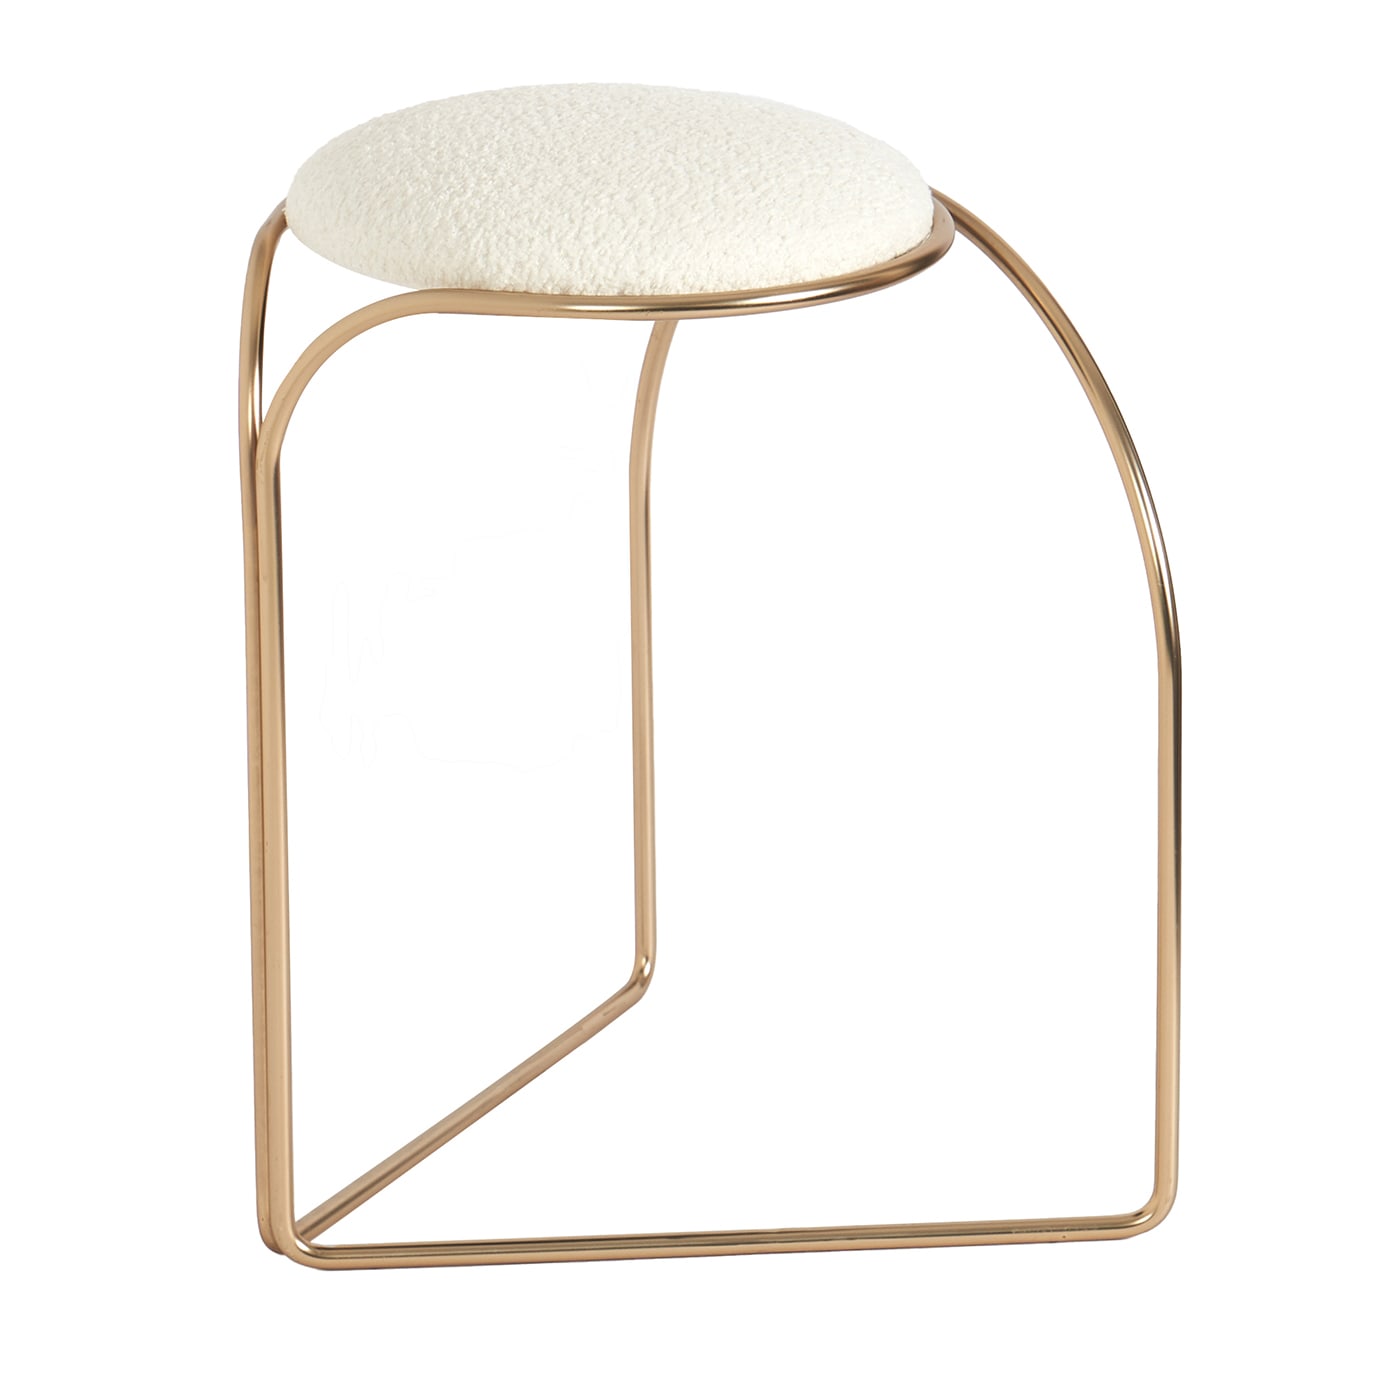 FLOW SCULPTURAL GOLD AND WHITE LOW STOOL - Enrico Girotti